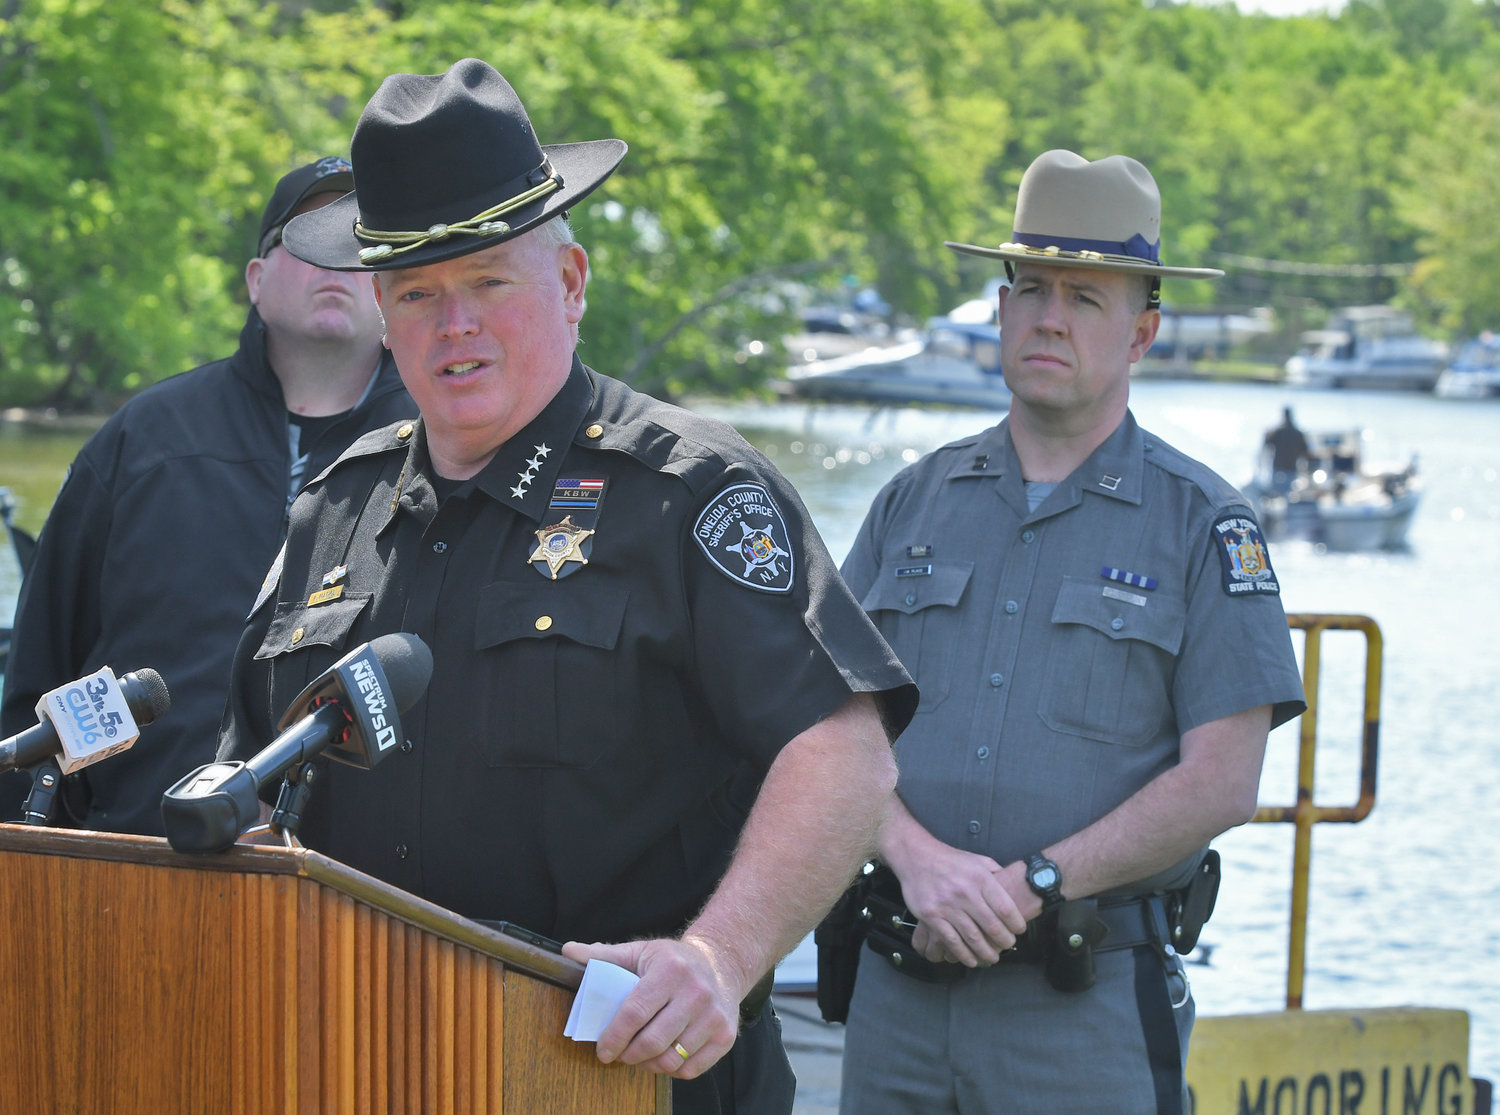 Oneida County Sheriff Robert M. Maciol visited Sylvan Beach Tuesday morning to give his annual speech on water and boater safety. Maciol said all people on a boater need a life jacket, and all boaters will need to have a boater safety certificate by 2025. He was joined by Sgt. Scott Kahl and State Police Captain Jason Place.